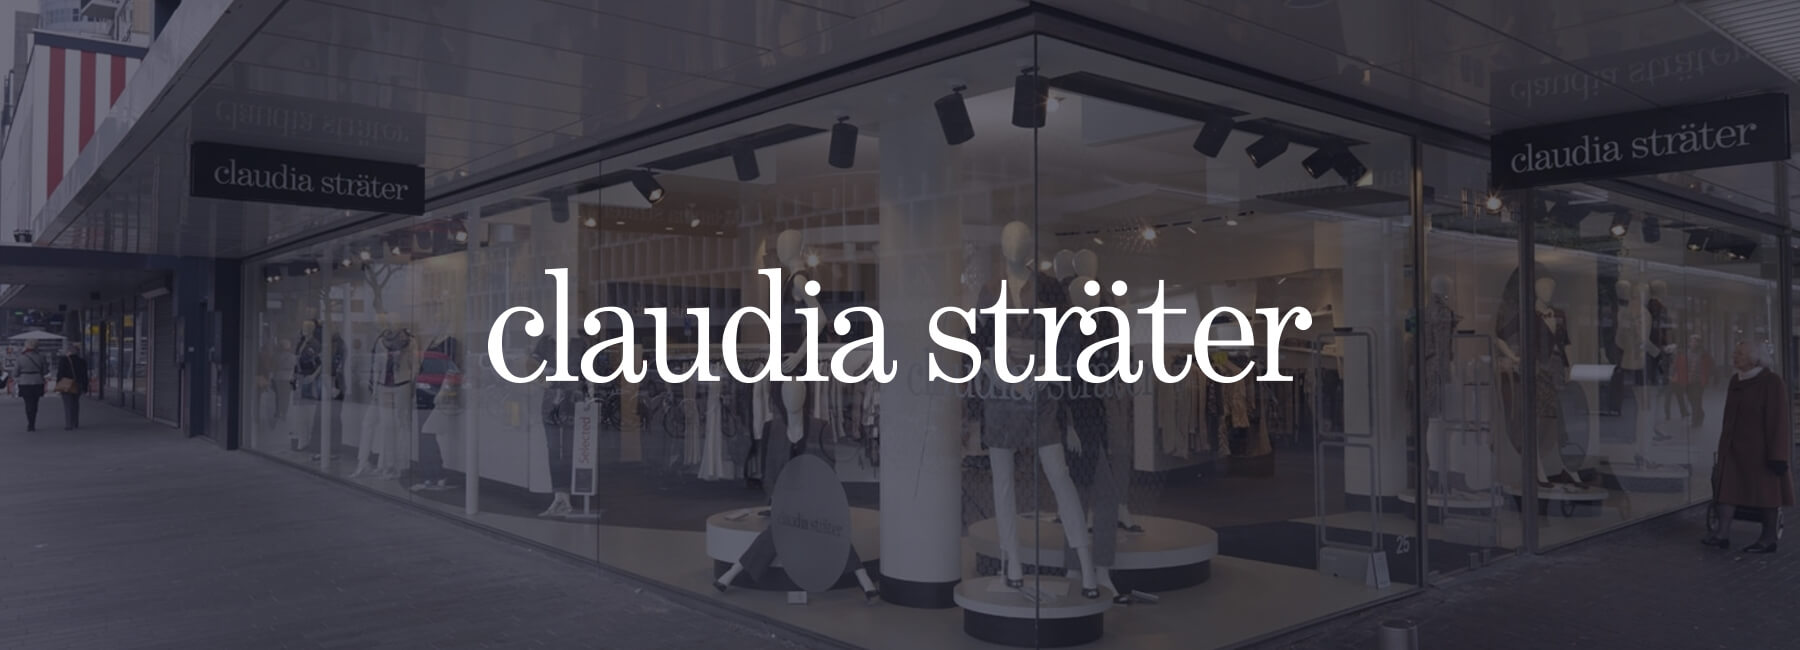 How Expresso Fashion & Claudia Sträter use Customer Feedback